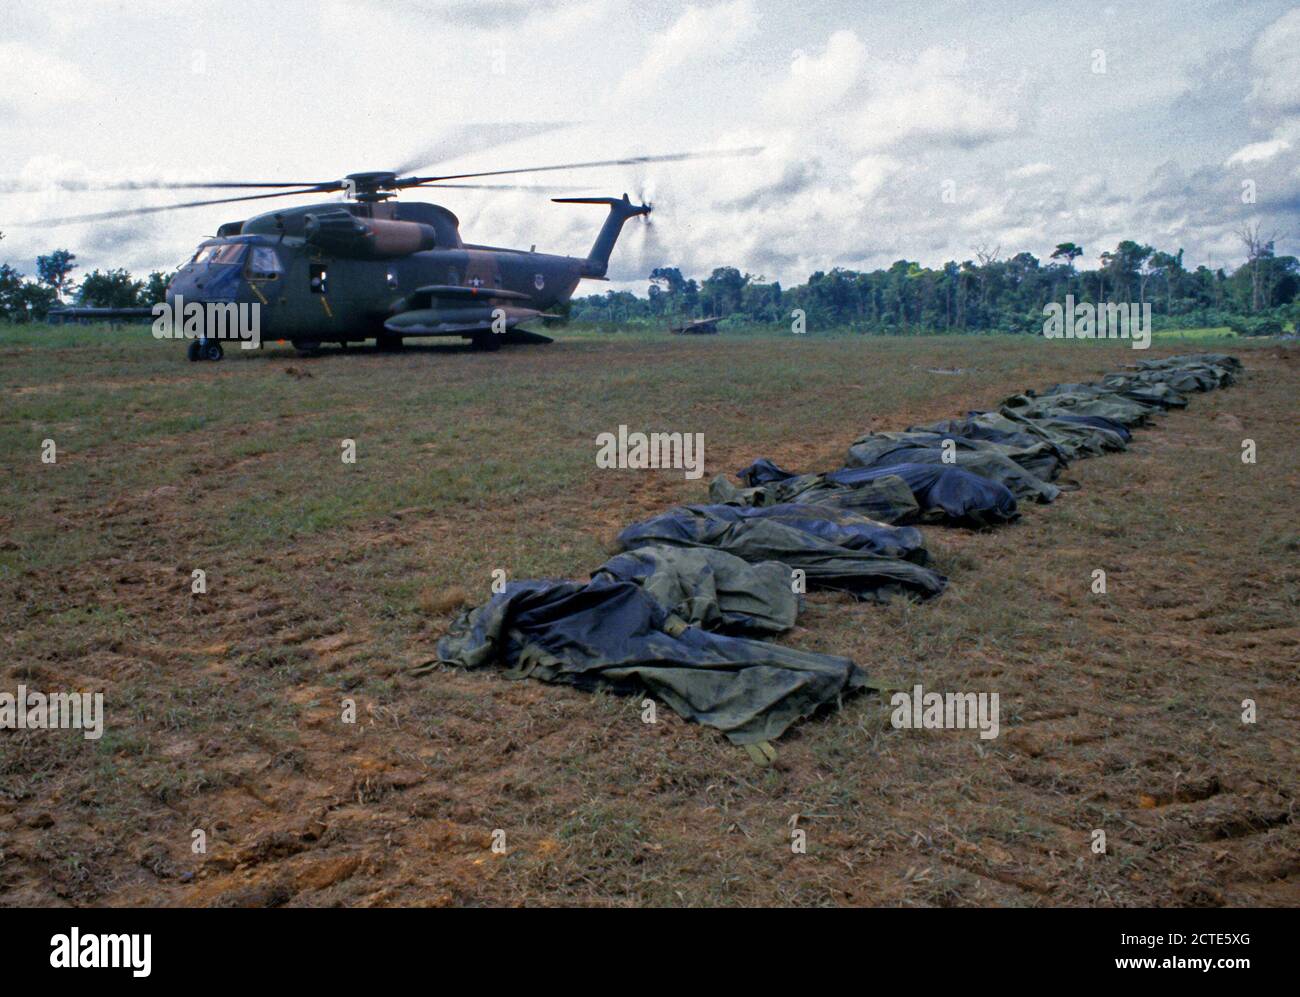 1978 - A US Air Force HH-53 Jolly Green Giant helicopter from the 55th Aerospace Rescue and Recovery Squadron stands by to assist in the removal of the remains of the victims of the Jonestown tragedy. Stock Photo